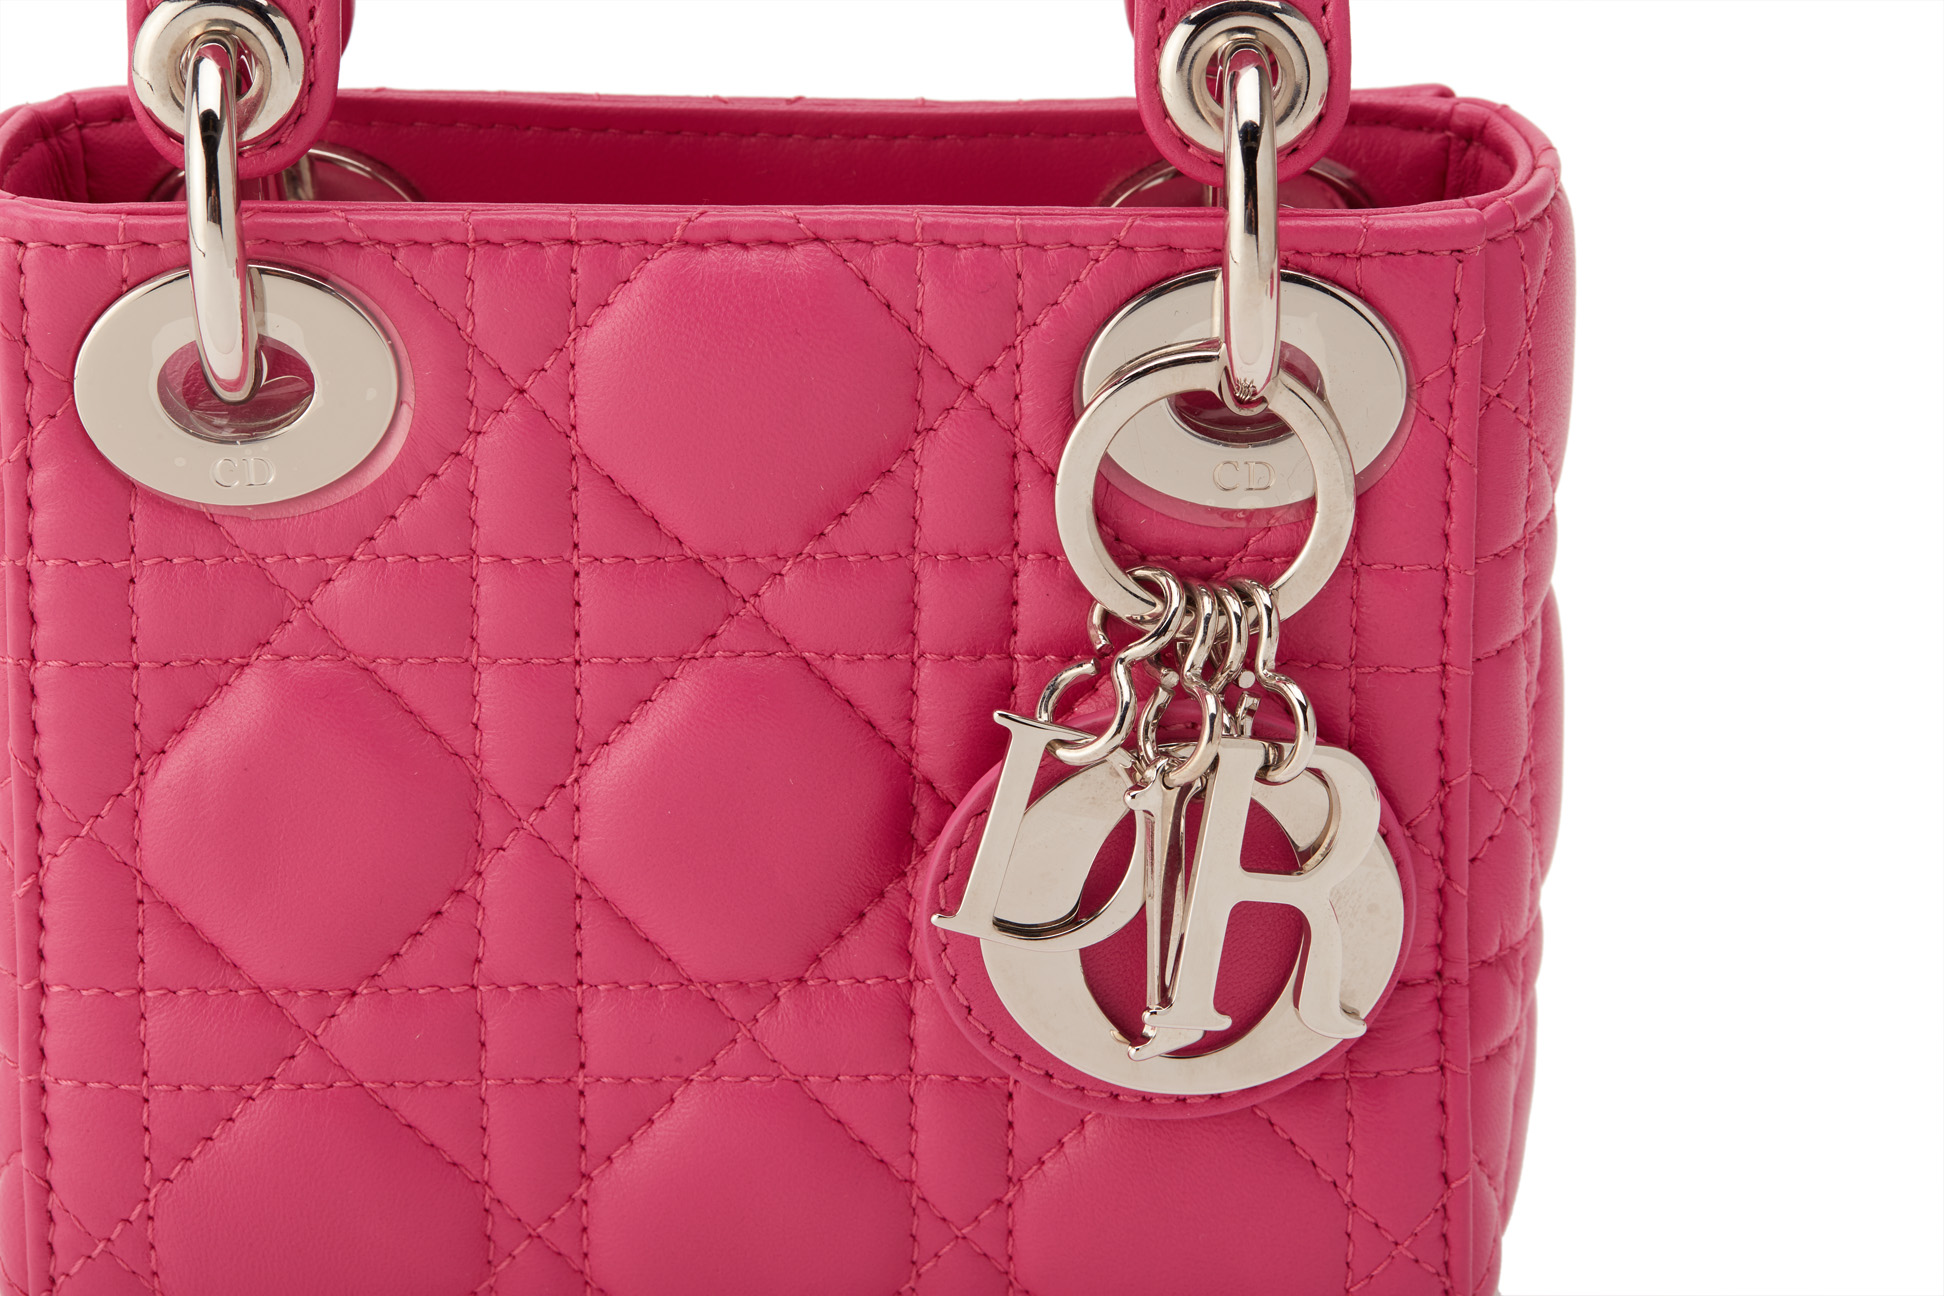 A CHRISTIAN DIOR PINK QUILTED MICRO LADY DIOR - Image 3 of 5